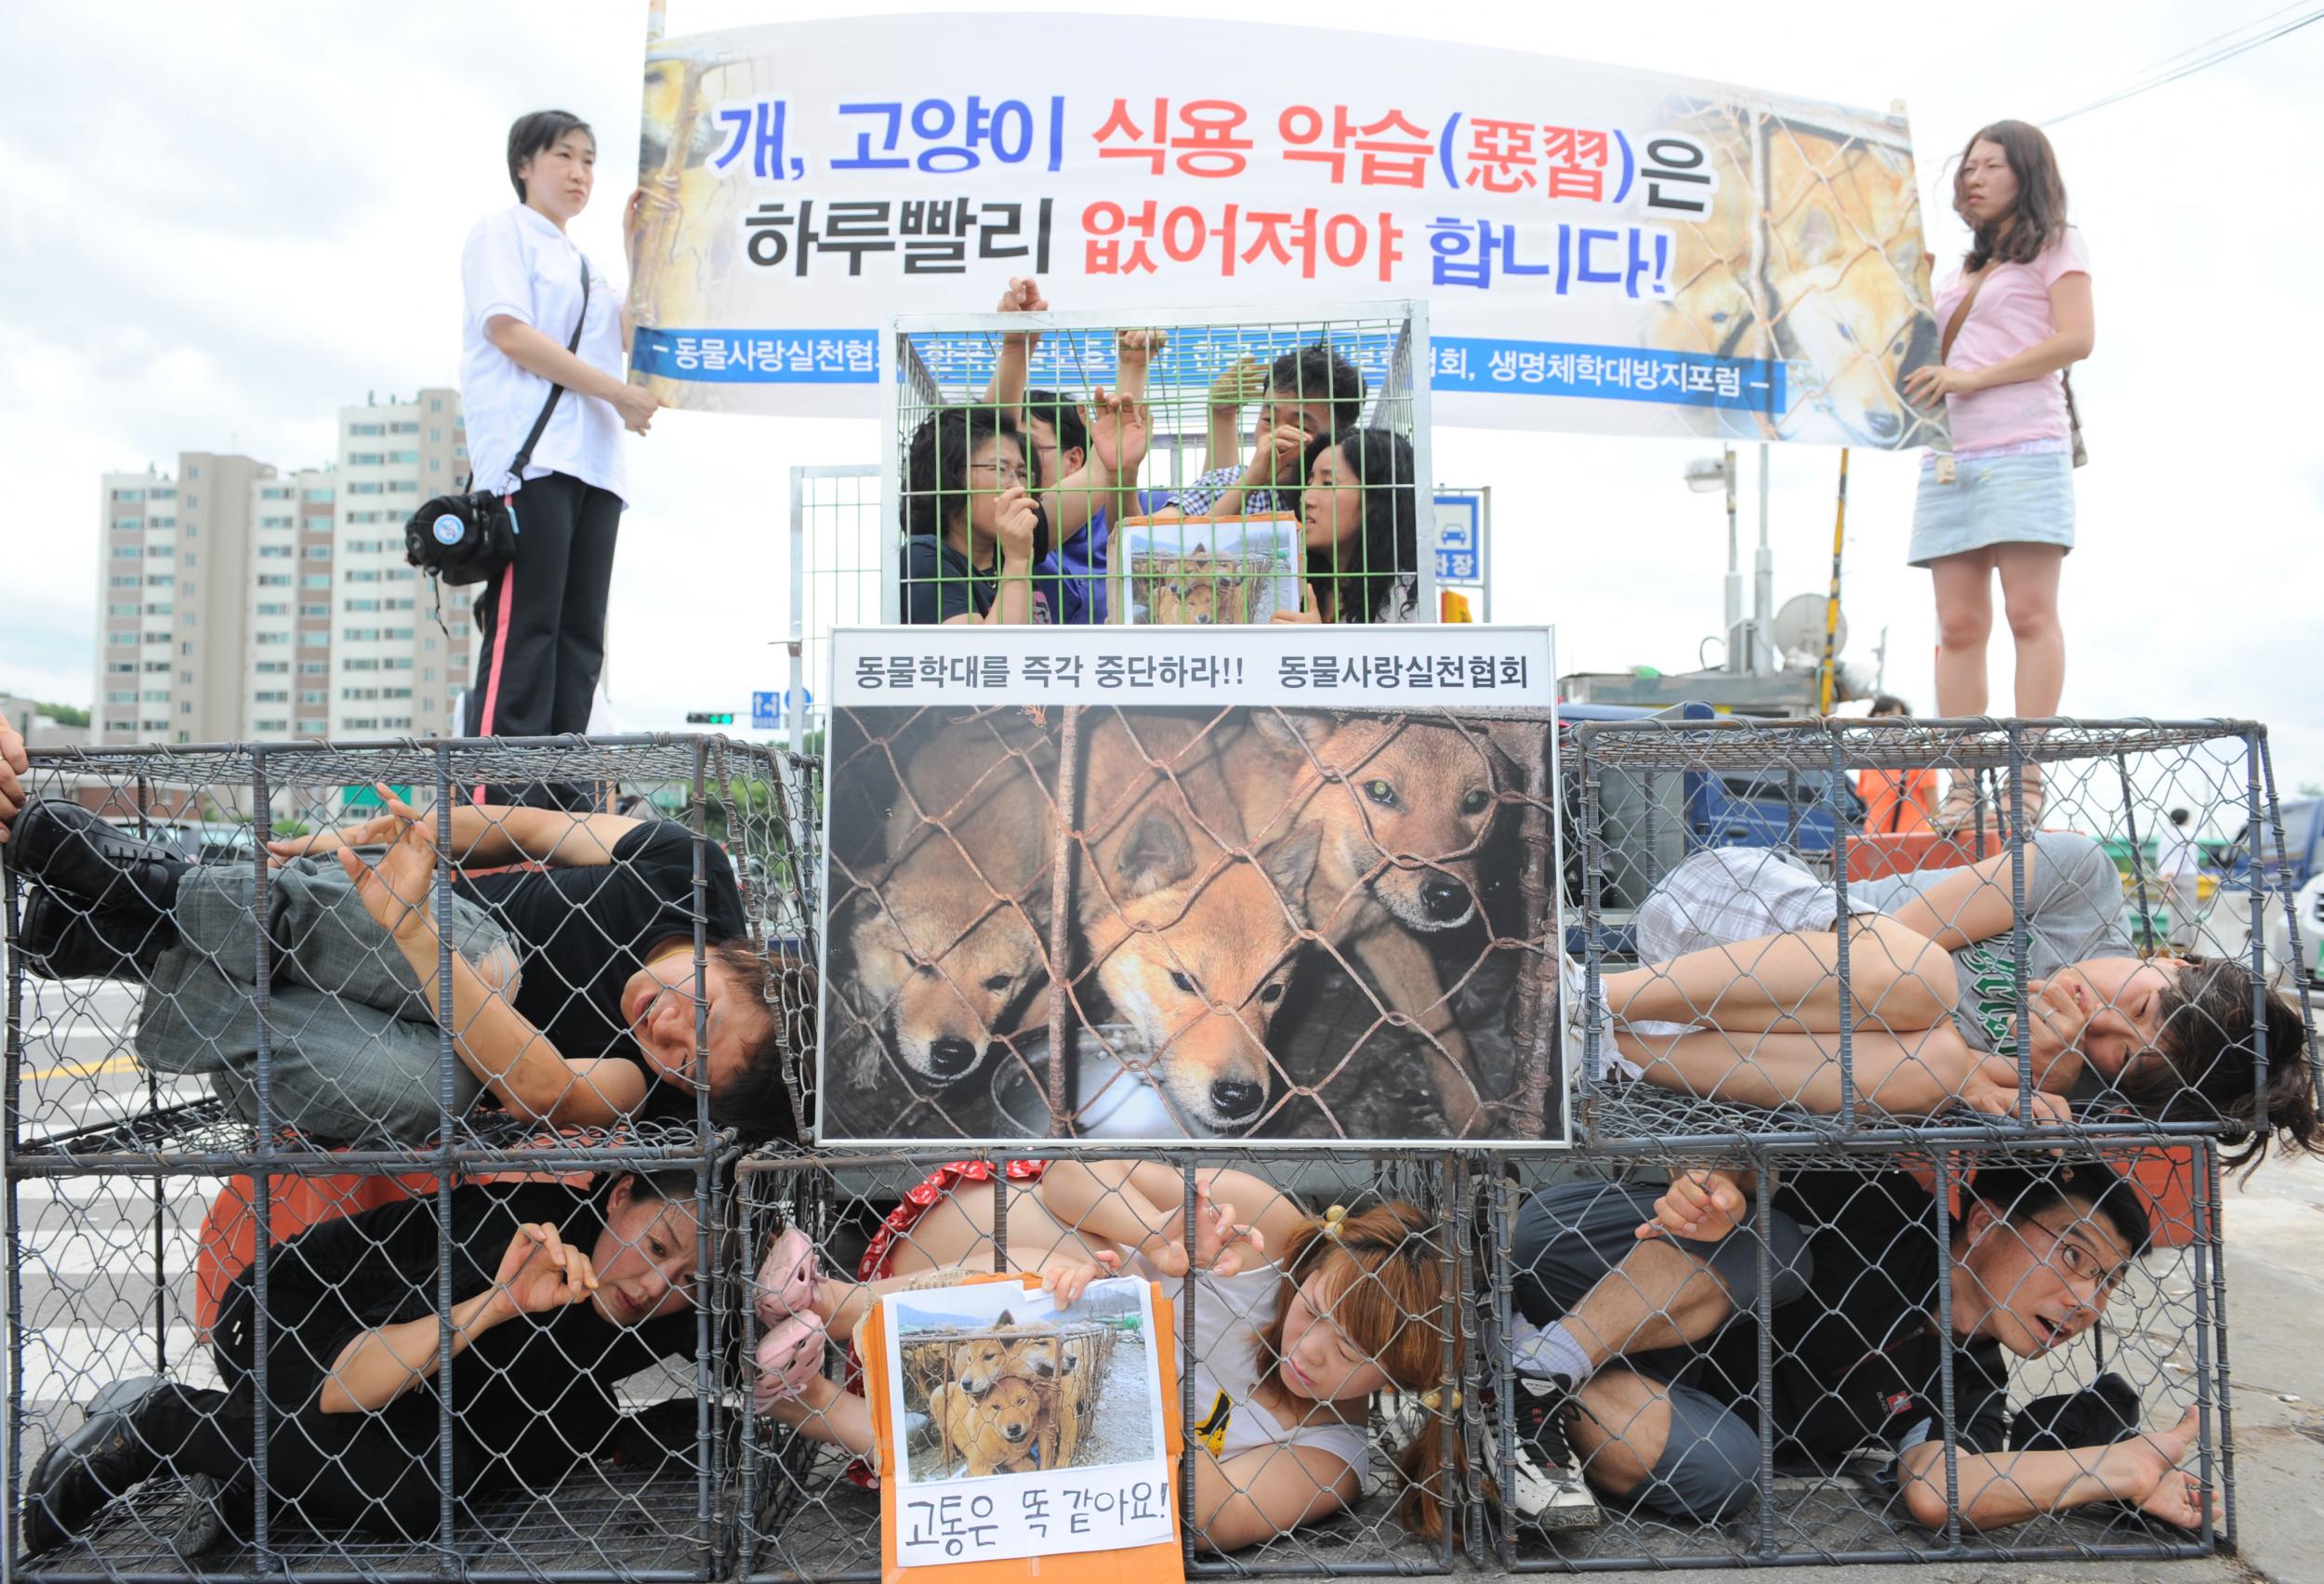 A legal grey area surrounds dog slaughtering in South Korea Getty